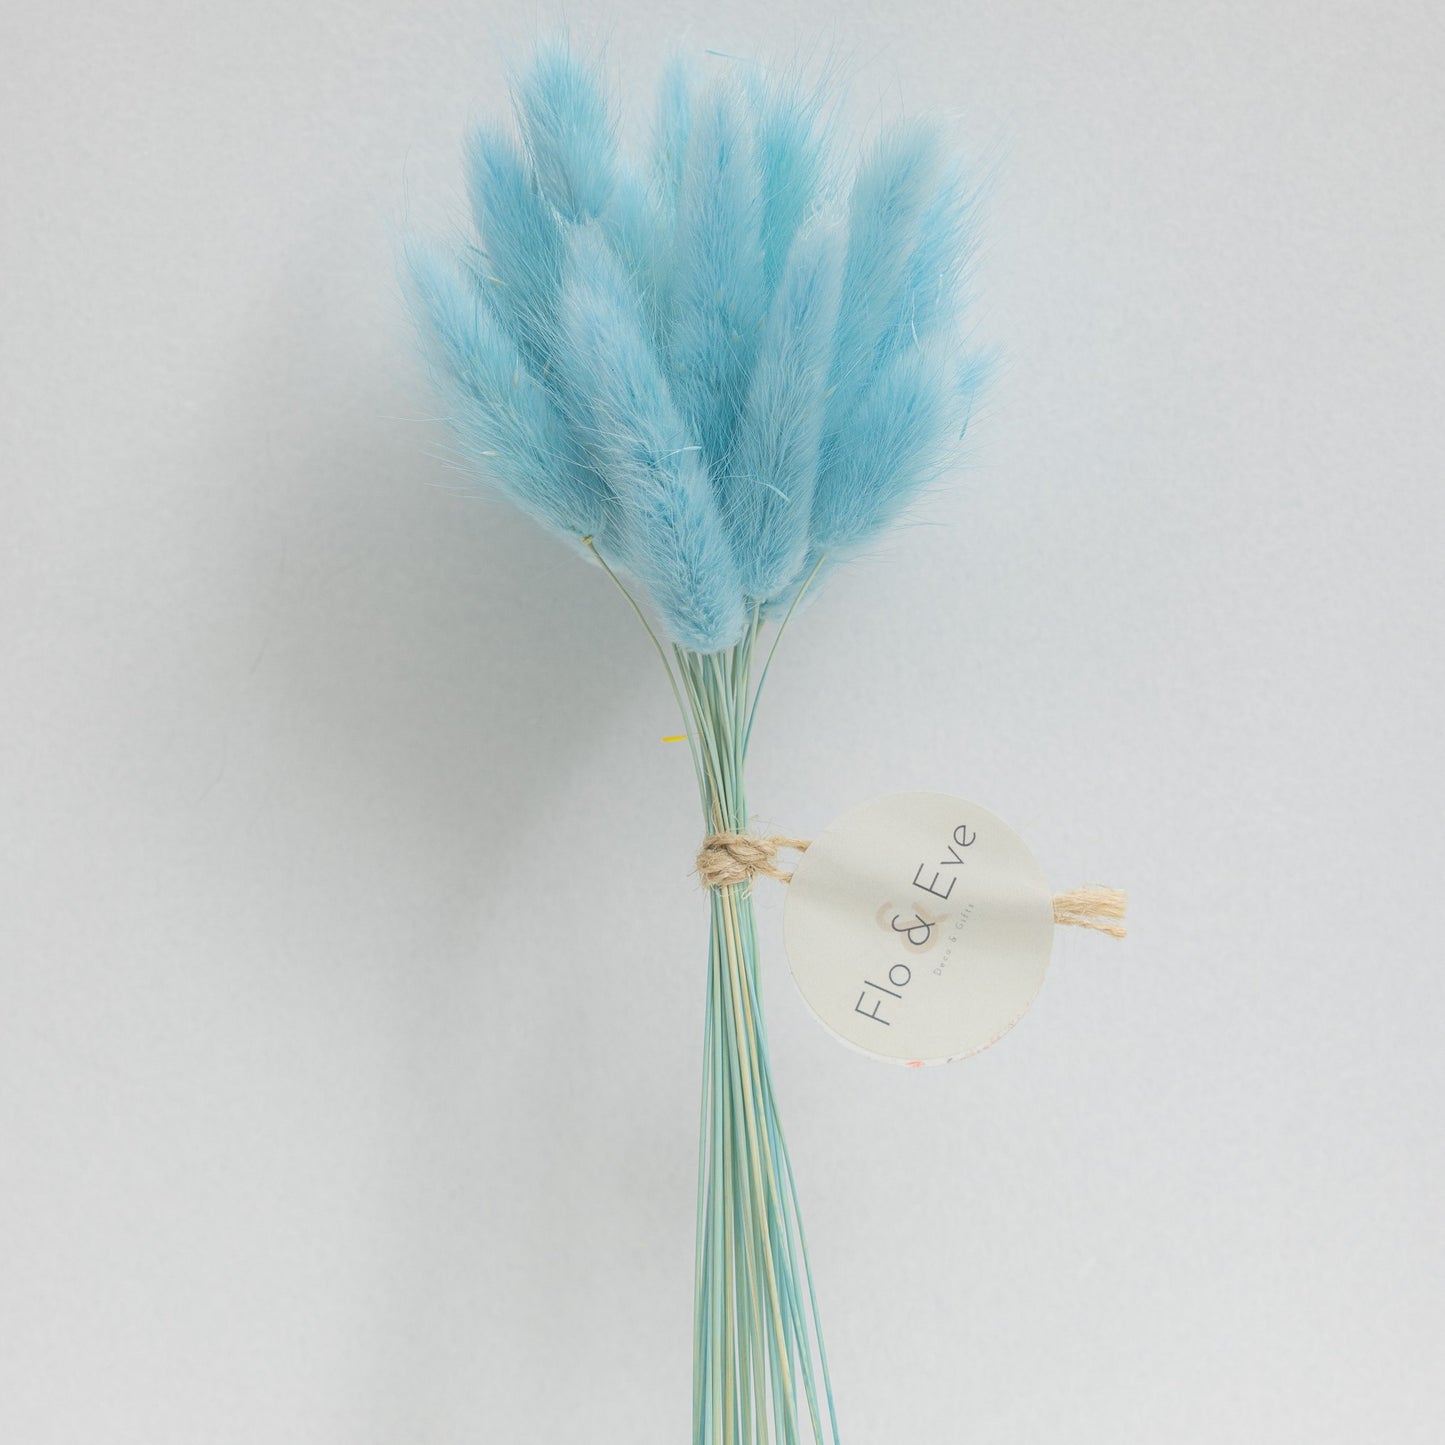 BRIGHT BLUE BUNNY TAILS